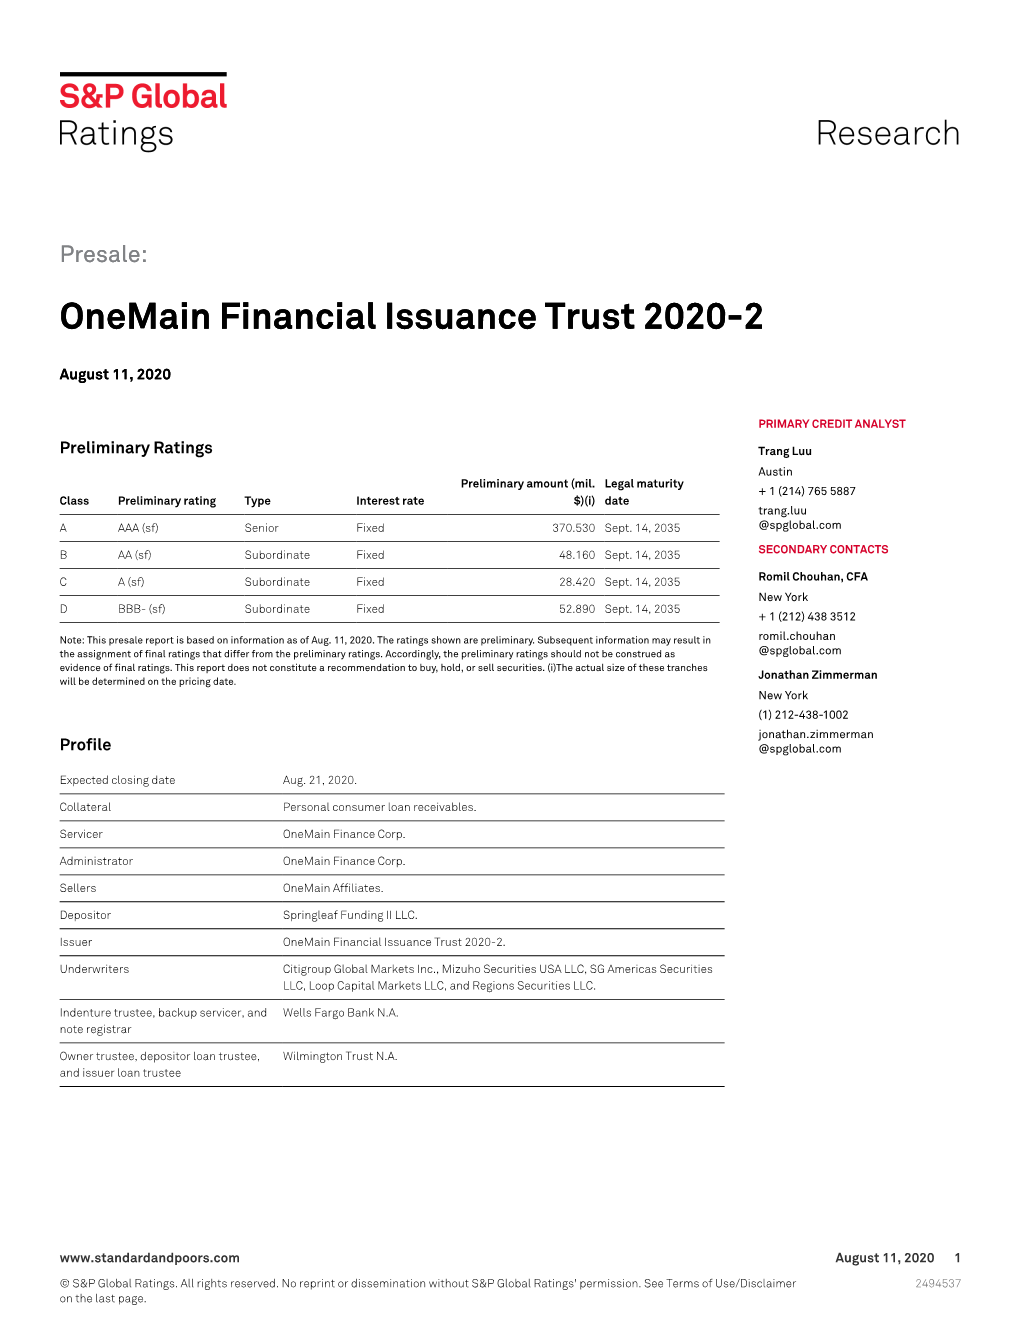 Onemain Financial Issuance Trust 2020-2